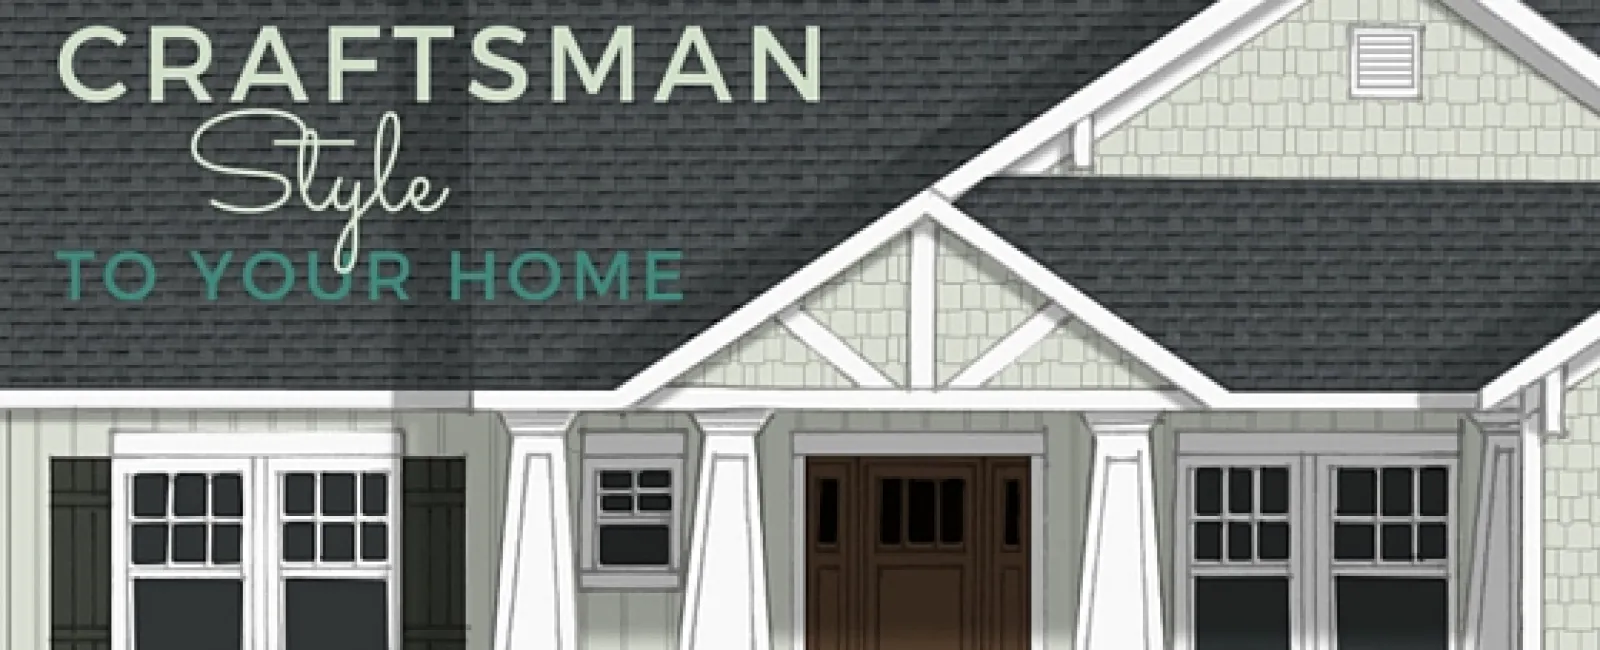 How to Add Craftsman Style to Your Home